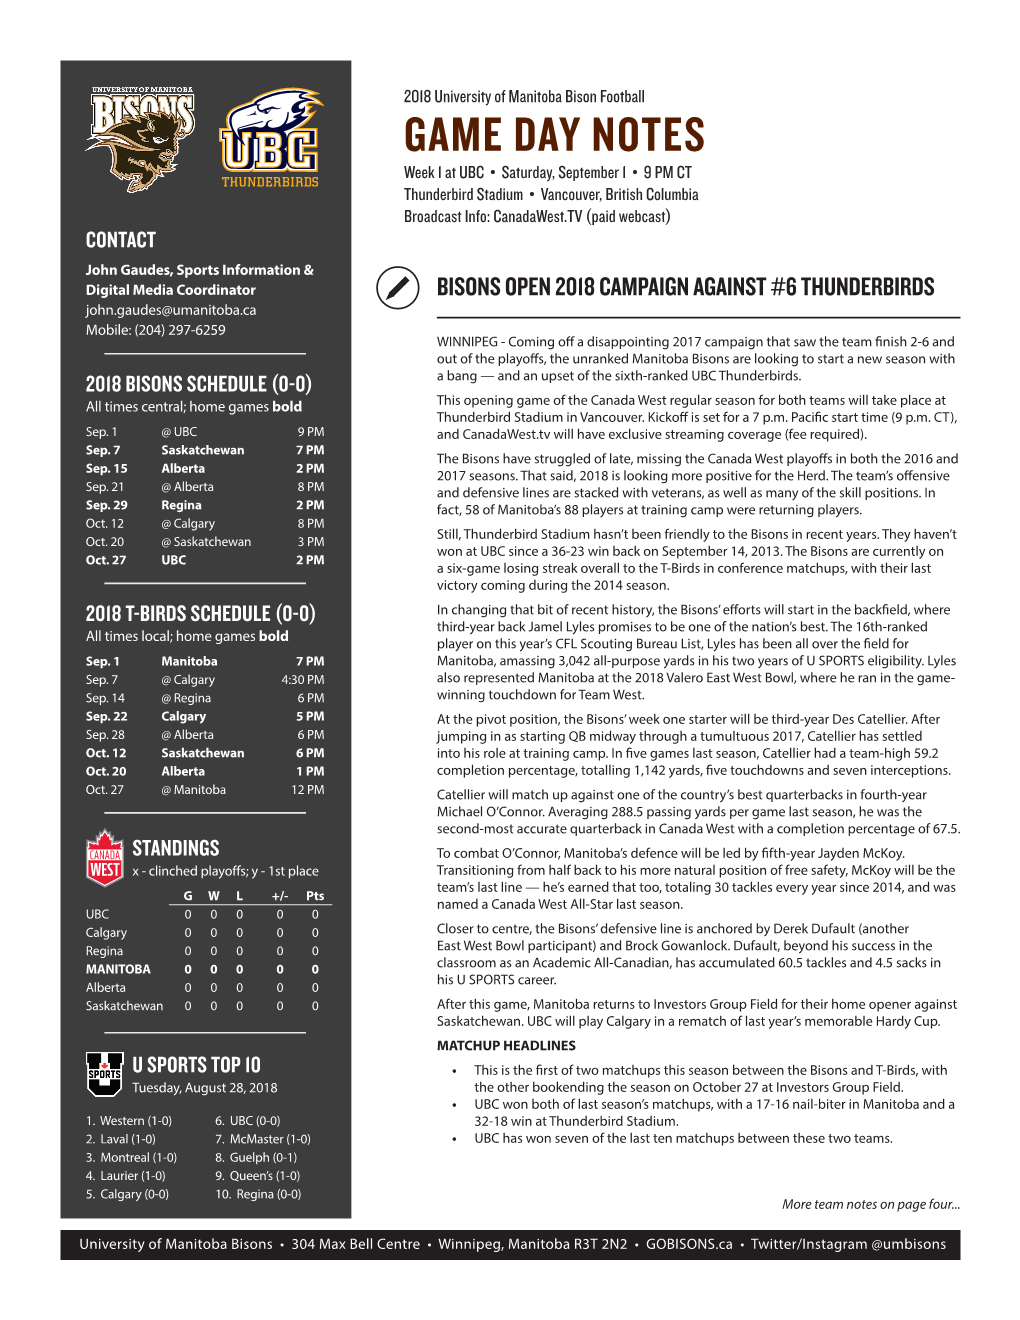 Game Day Notes